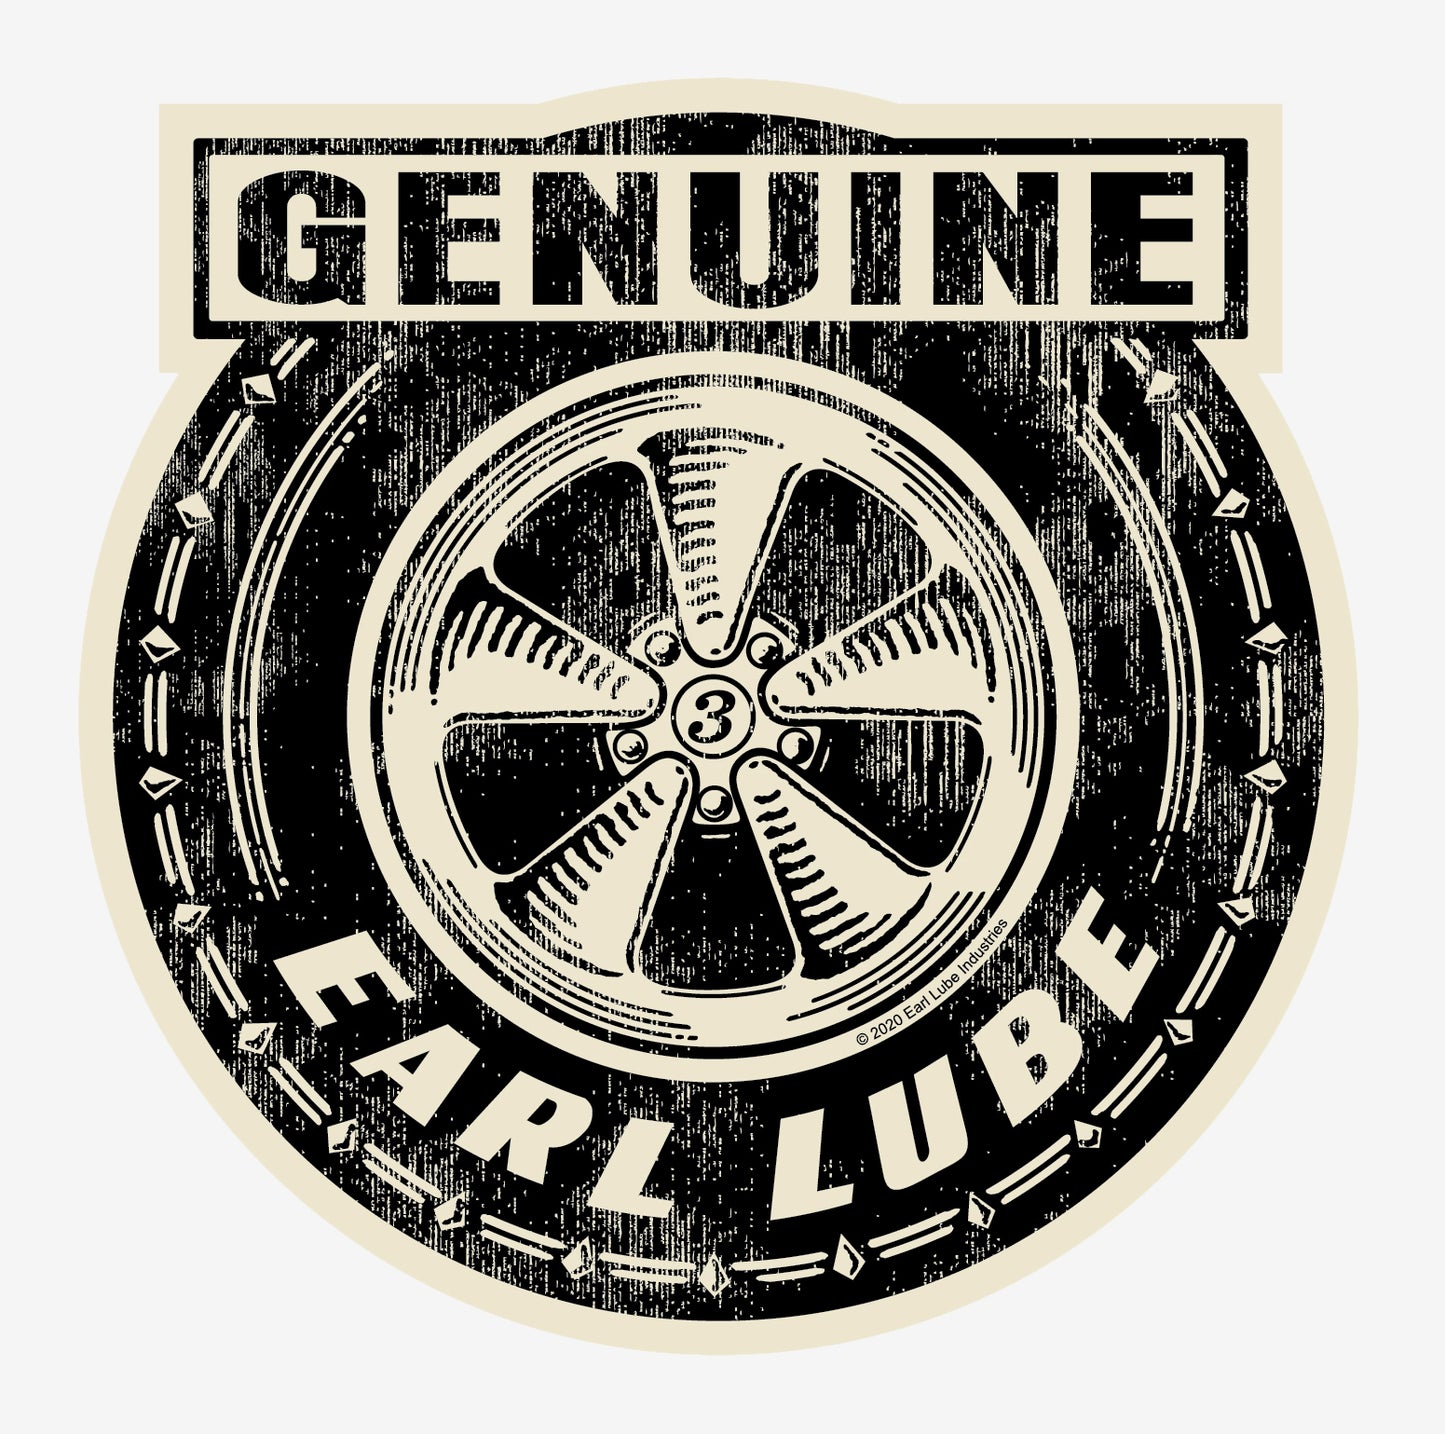 Genuine Earl Lube Sticker: Inspired by a vintage pie crust slick and classic five-spoke American Racing mag wheel, reminiscent of my favorite childhood sticker adorning my Dad's race car.